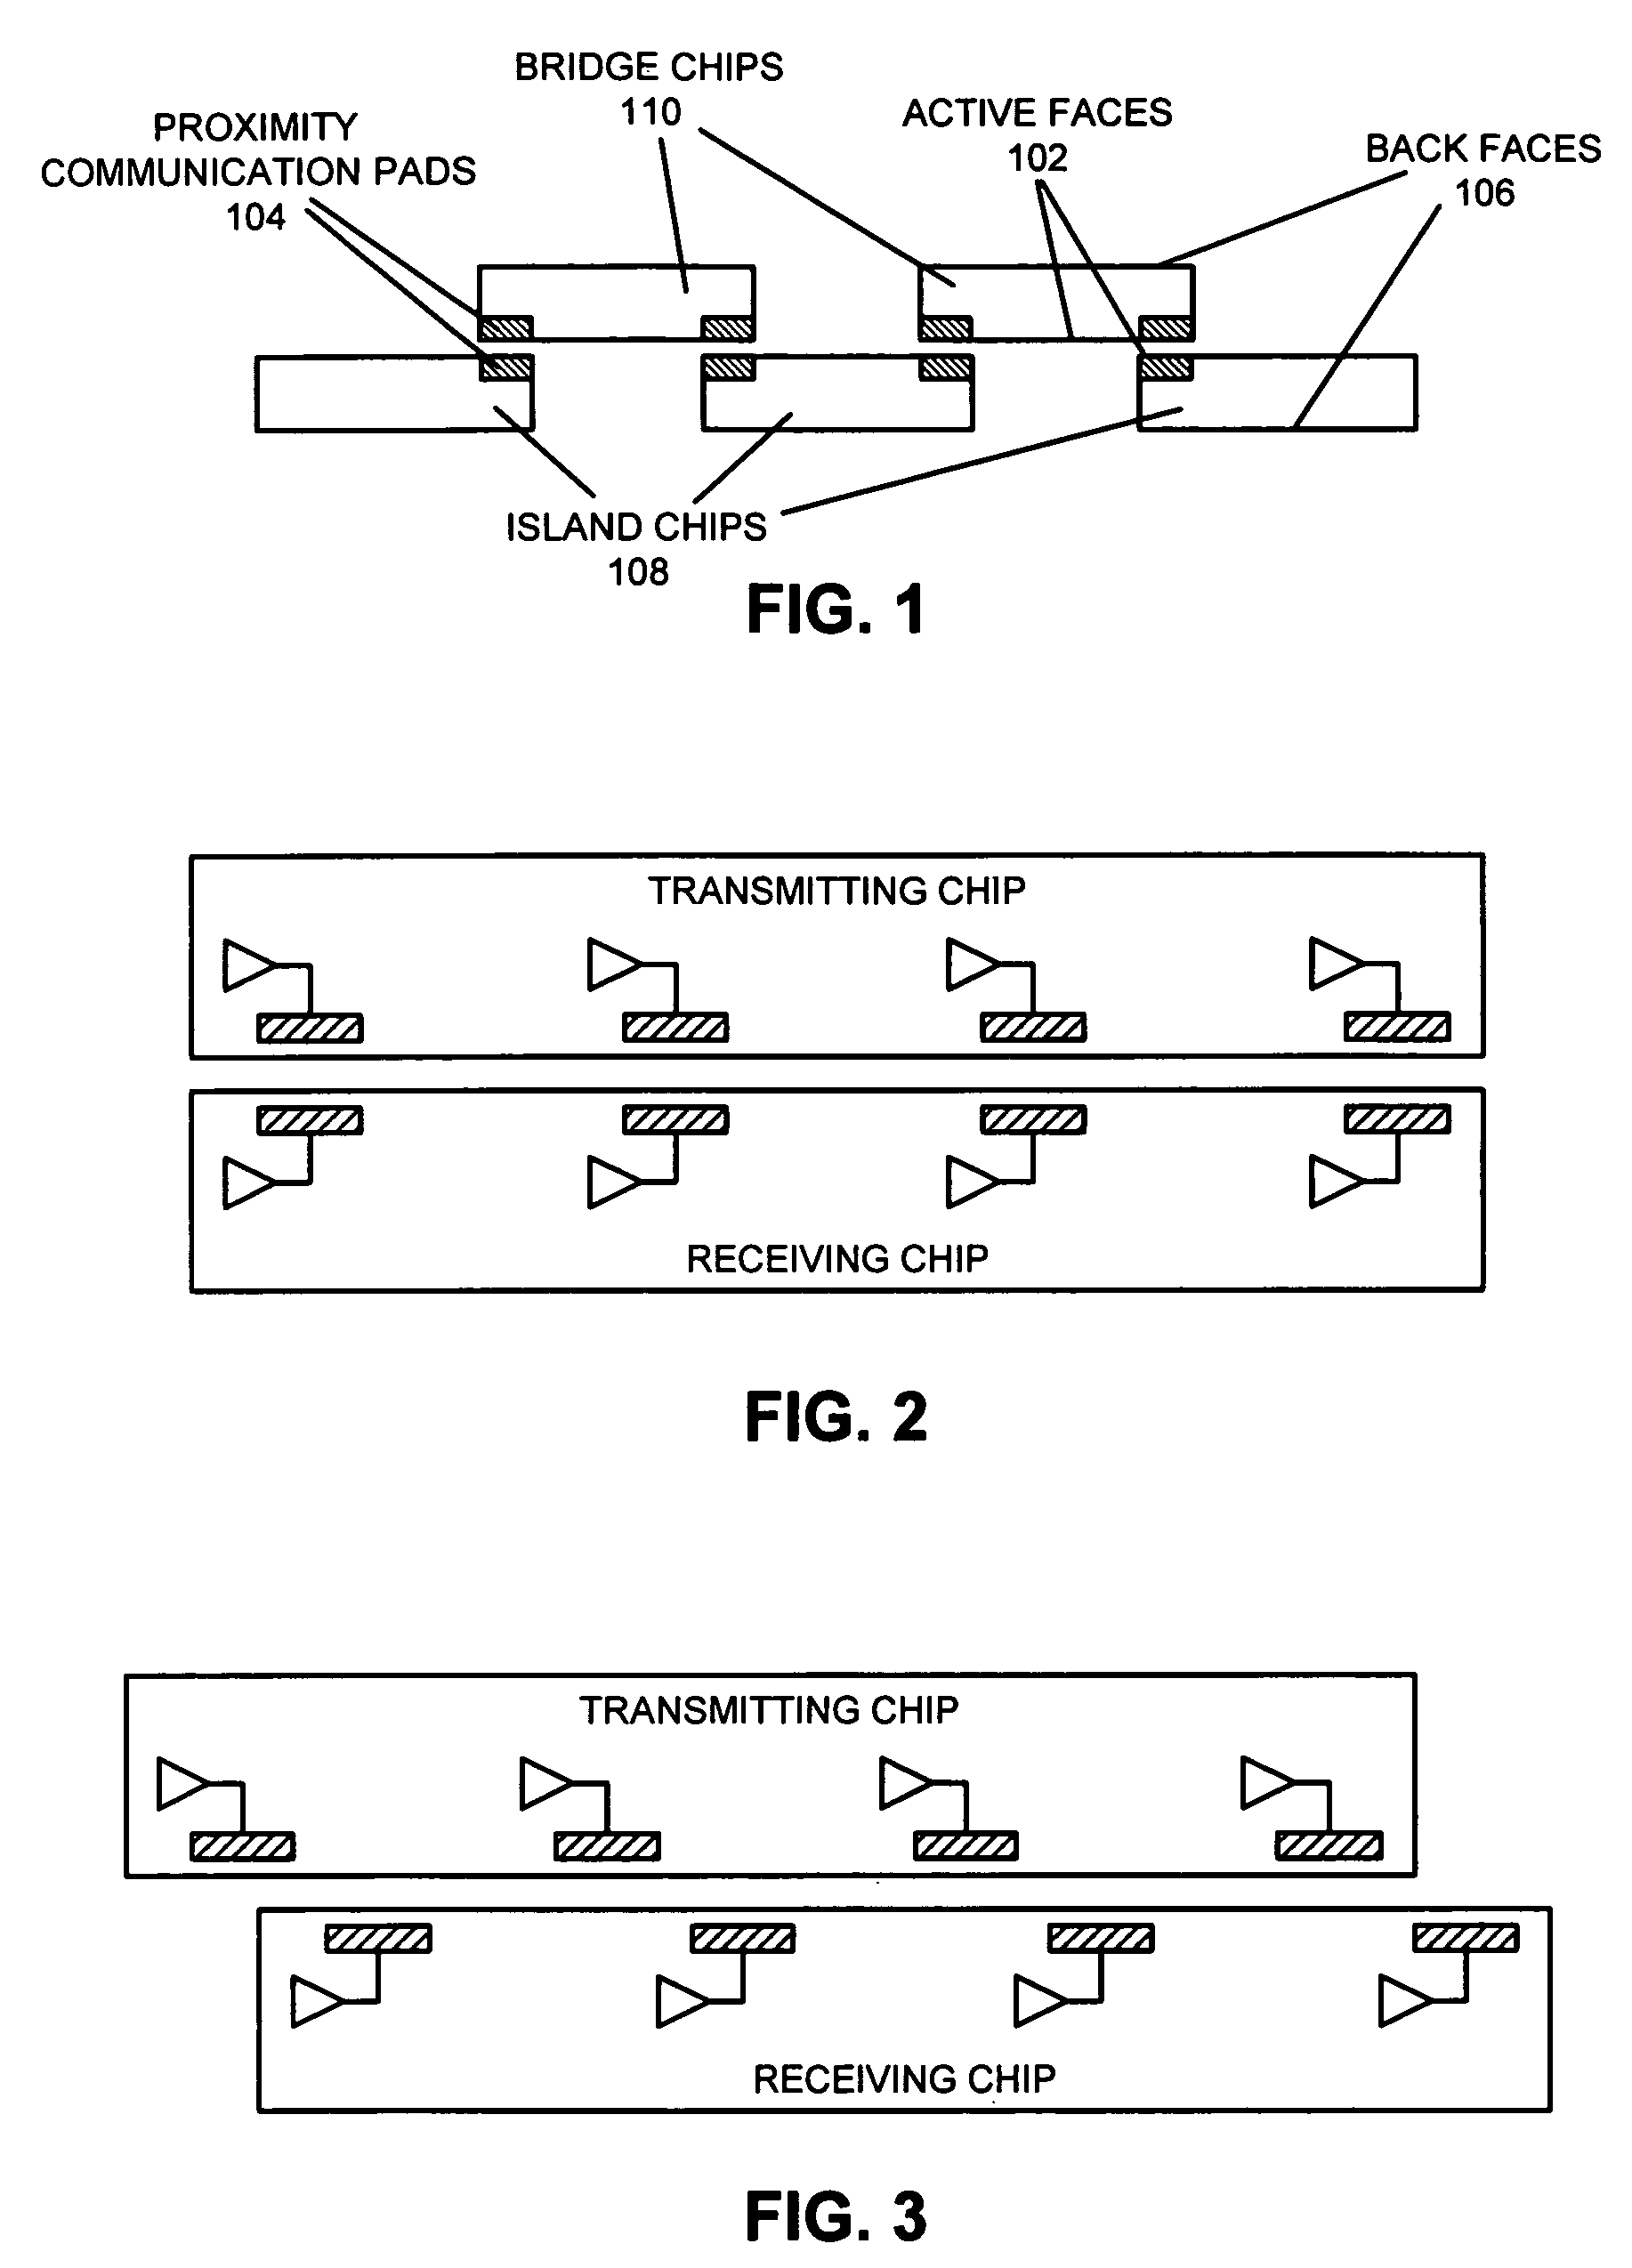 Method and apparatus for facilitating proximity communication and power delivery